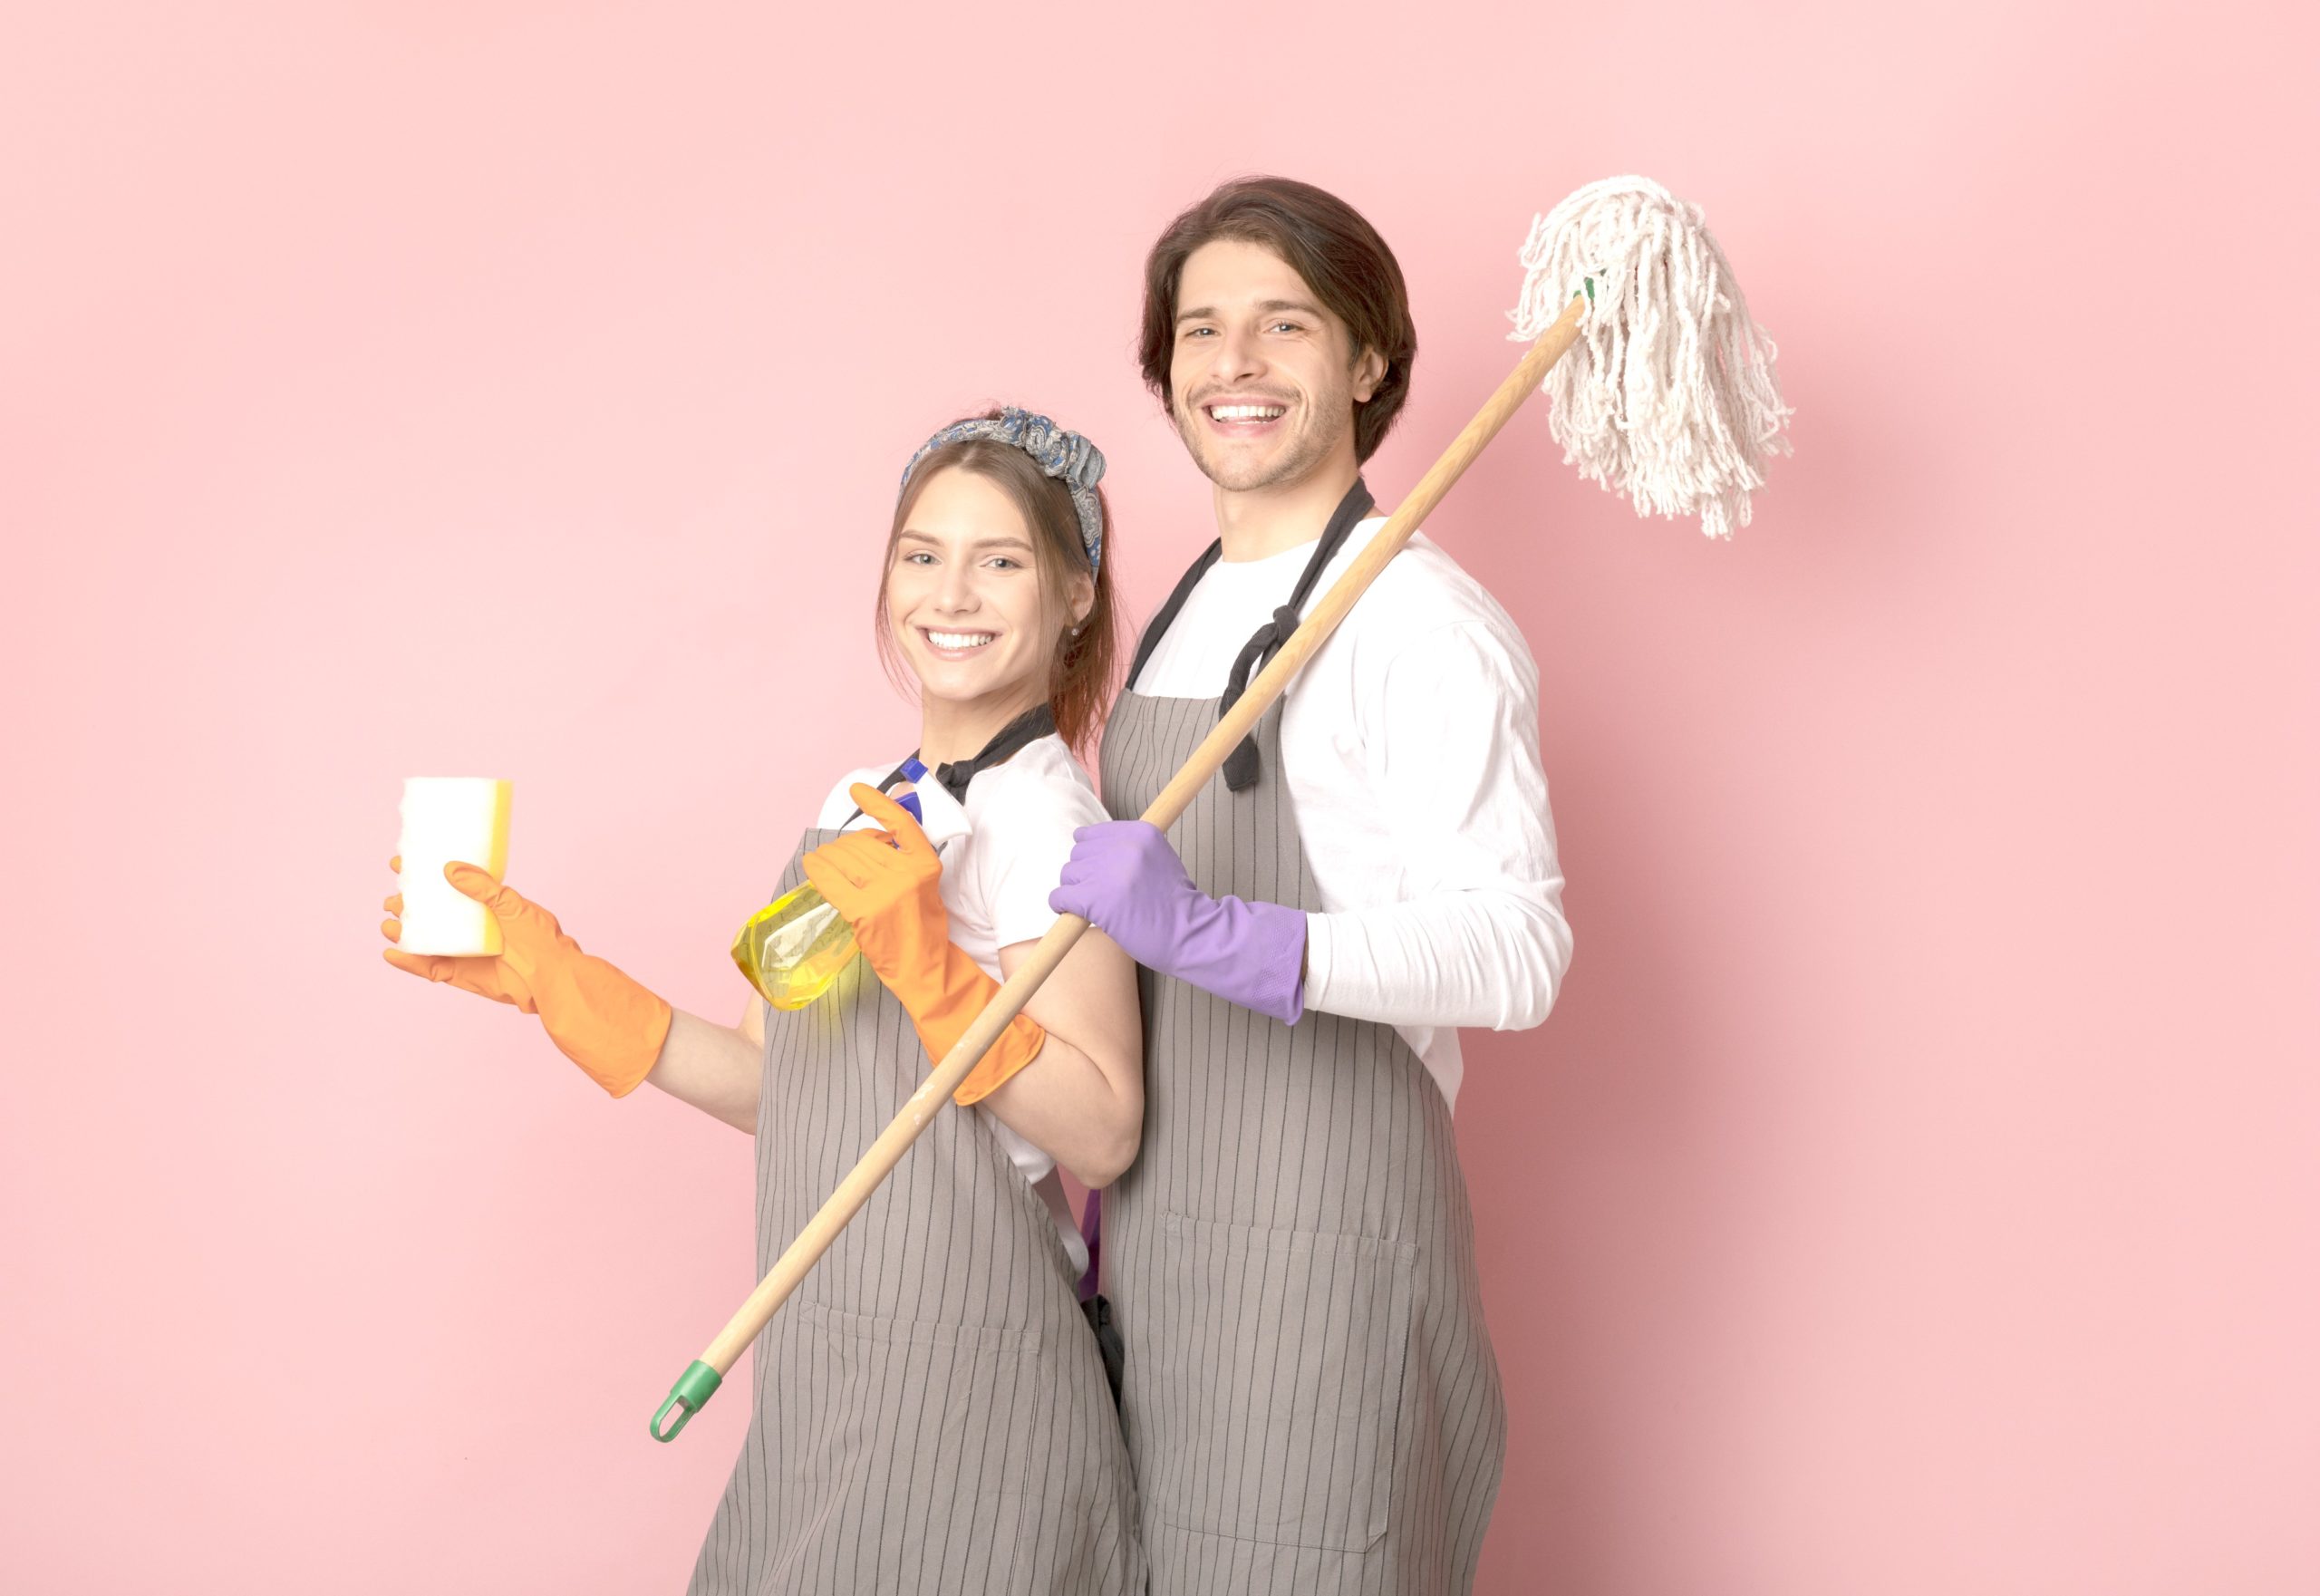 <img src="couple.jpg" alt="couple cleaning together"/> 